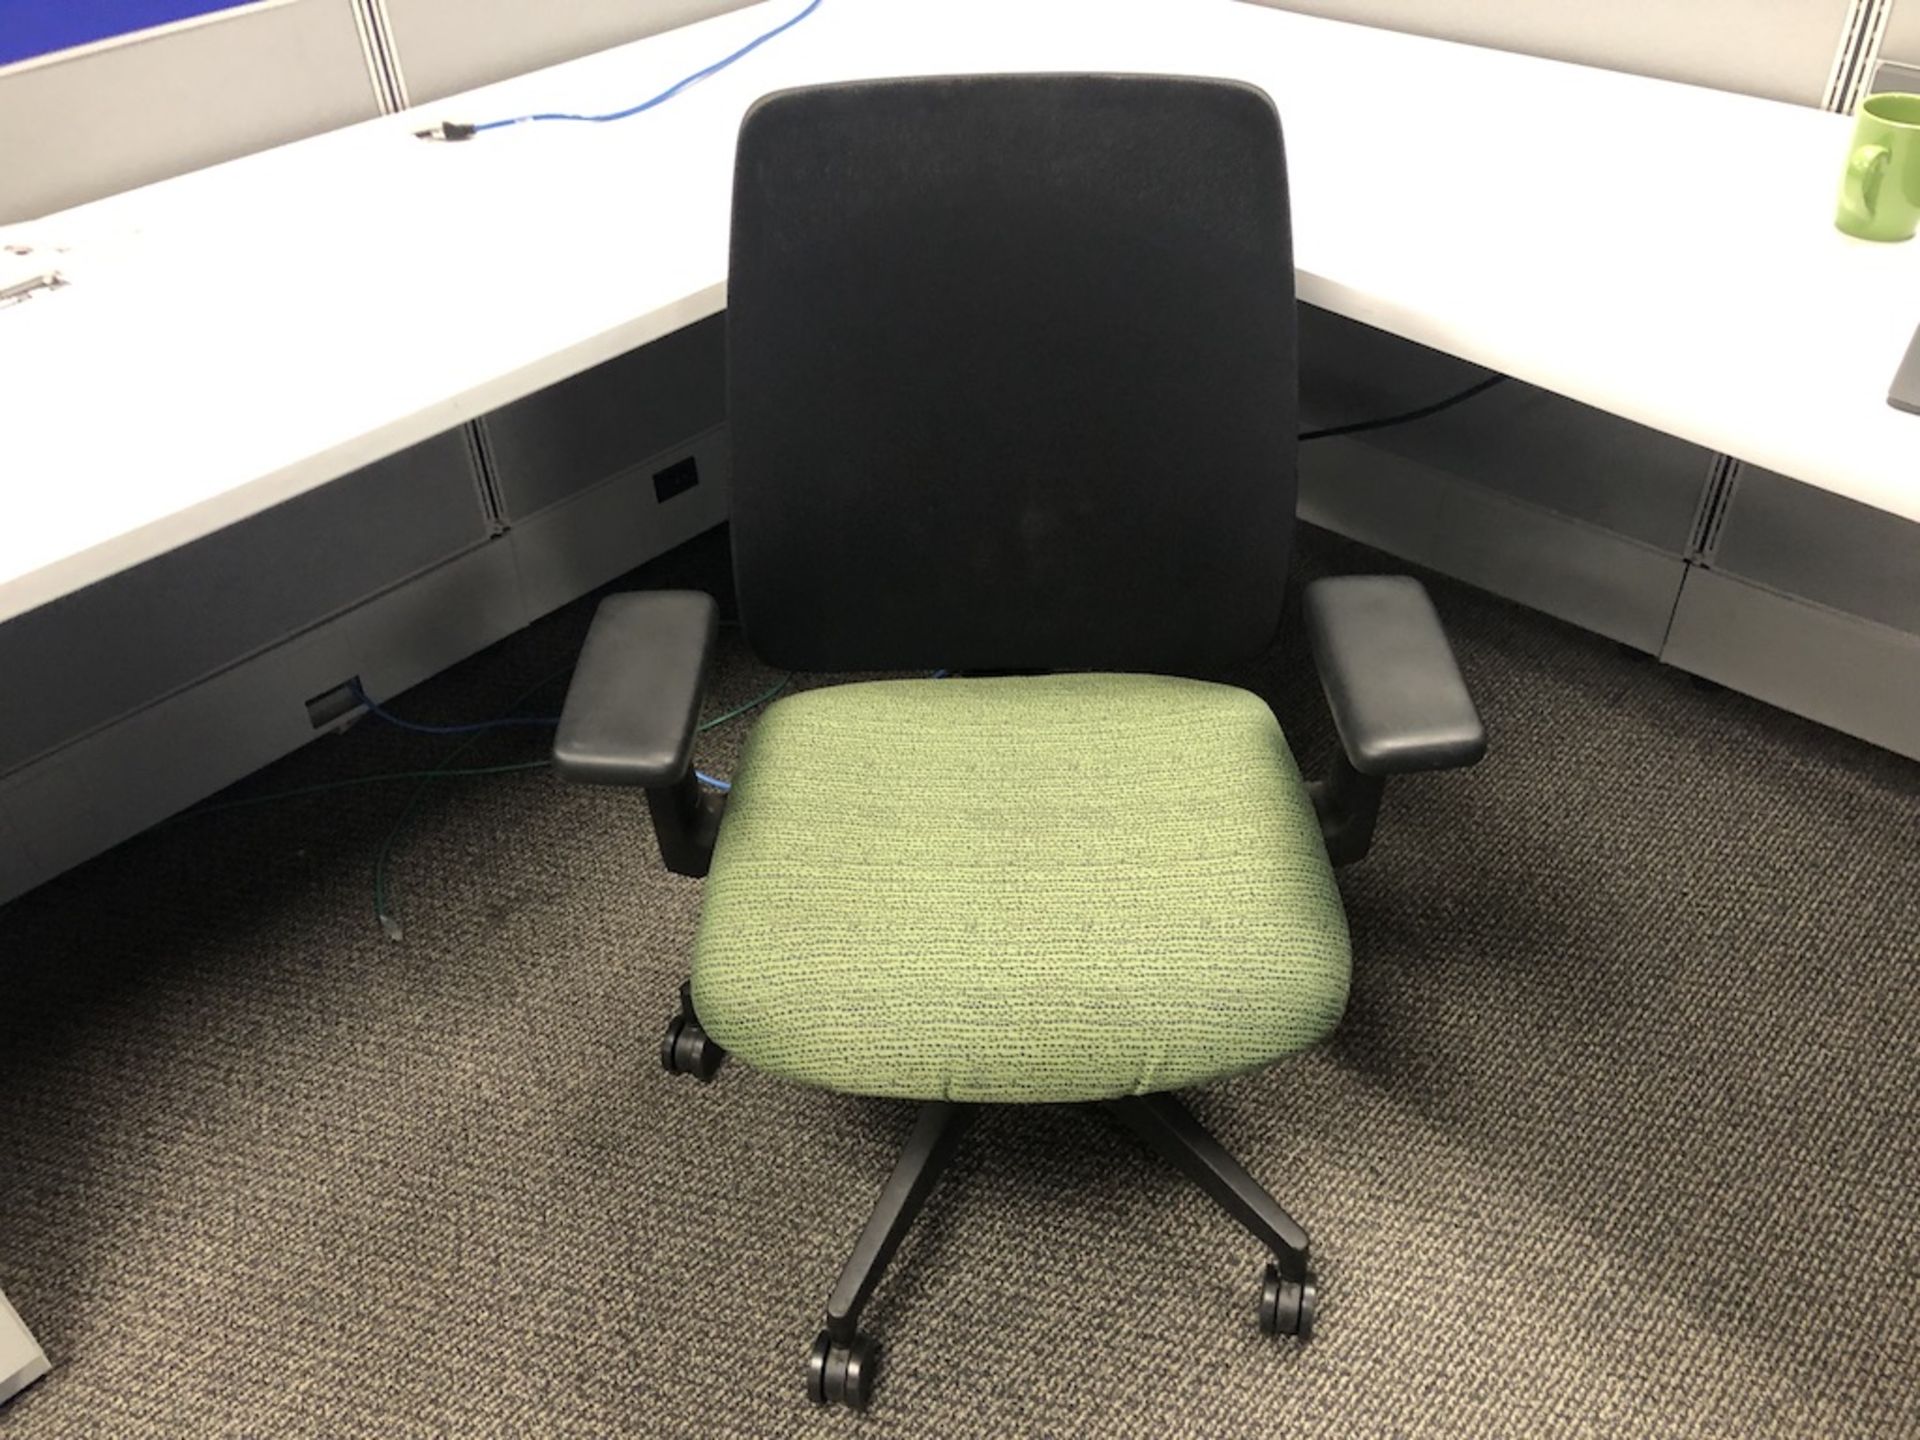 5 CASTER OFFICE CHAIR PADDED ARM REST ( BOTH ARMS THE RUBBER COATING HAS SPLIT ), GREEN SEATED